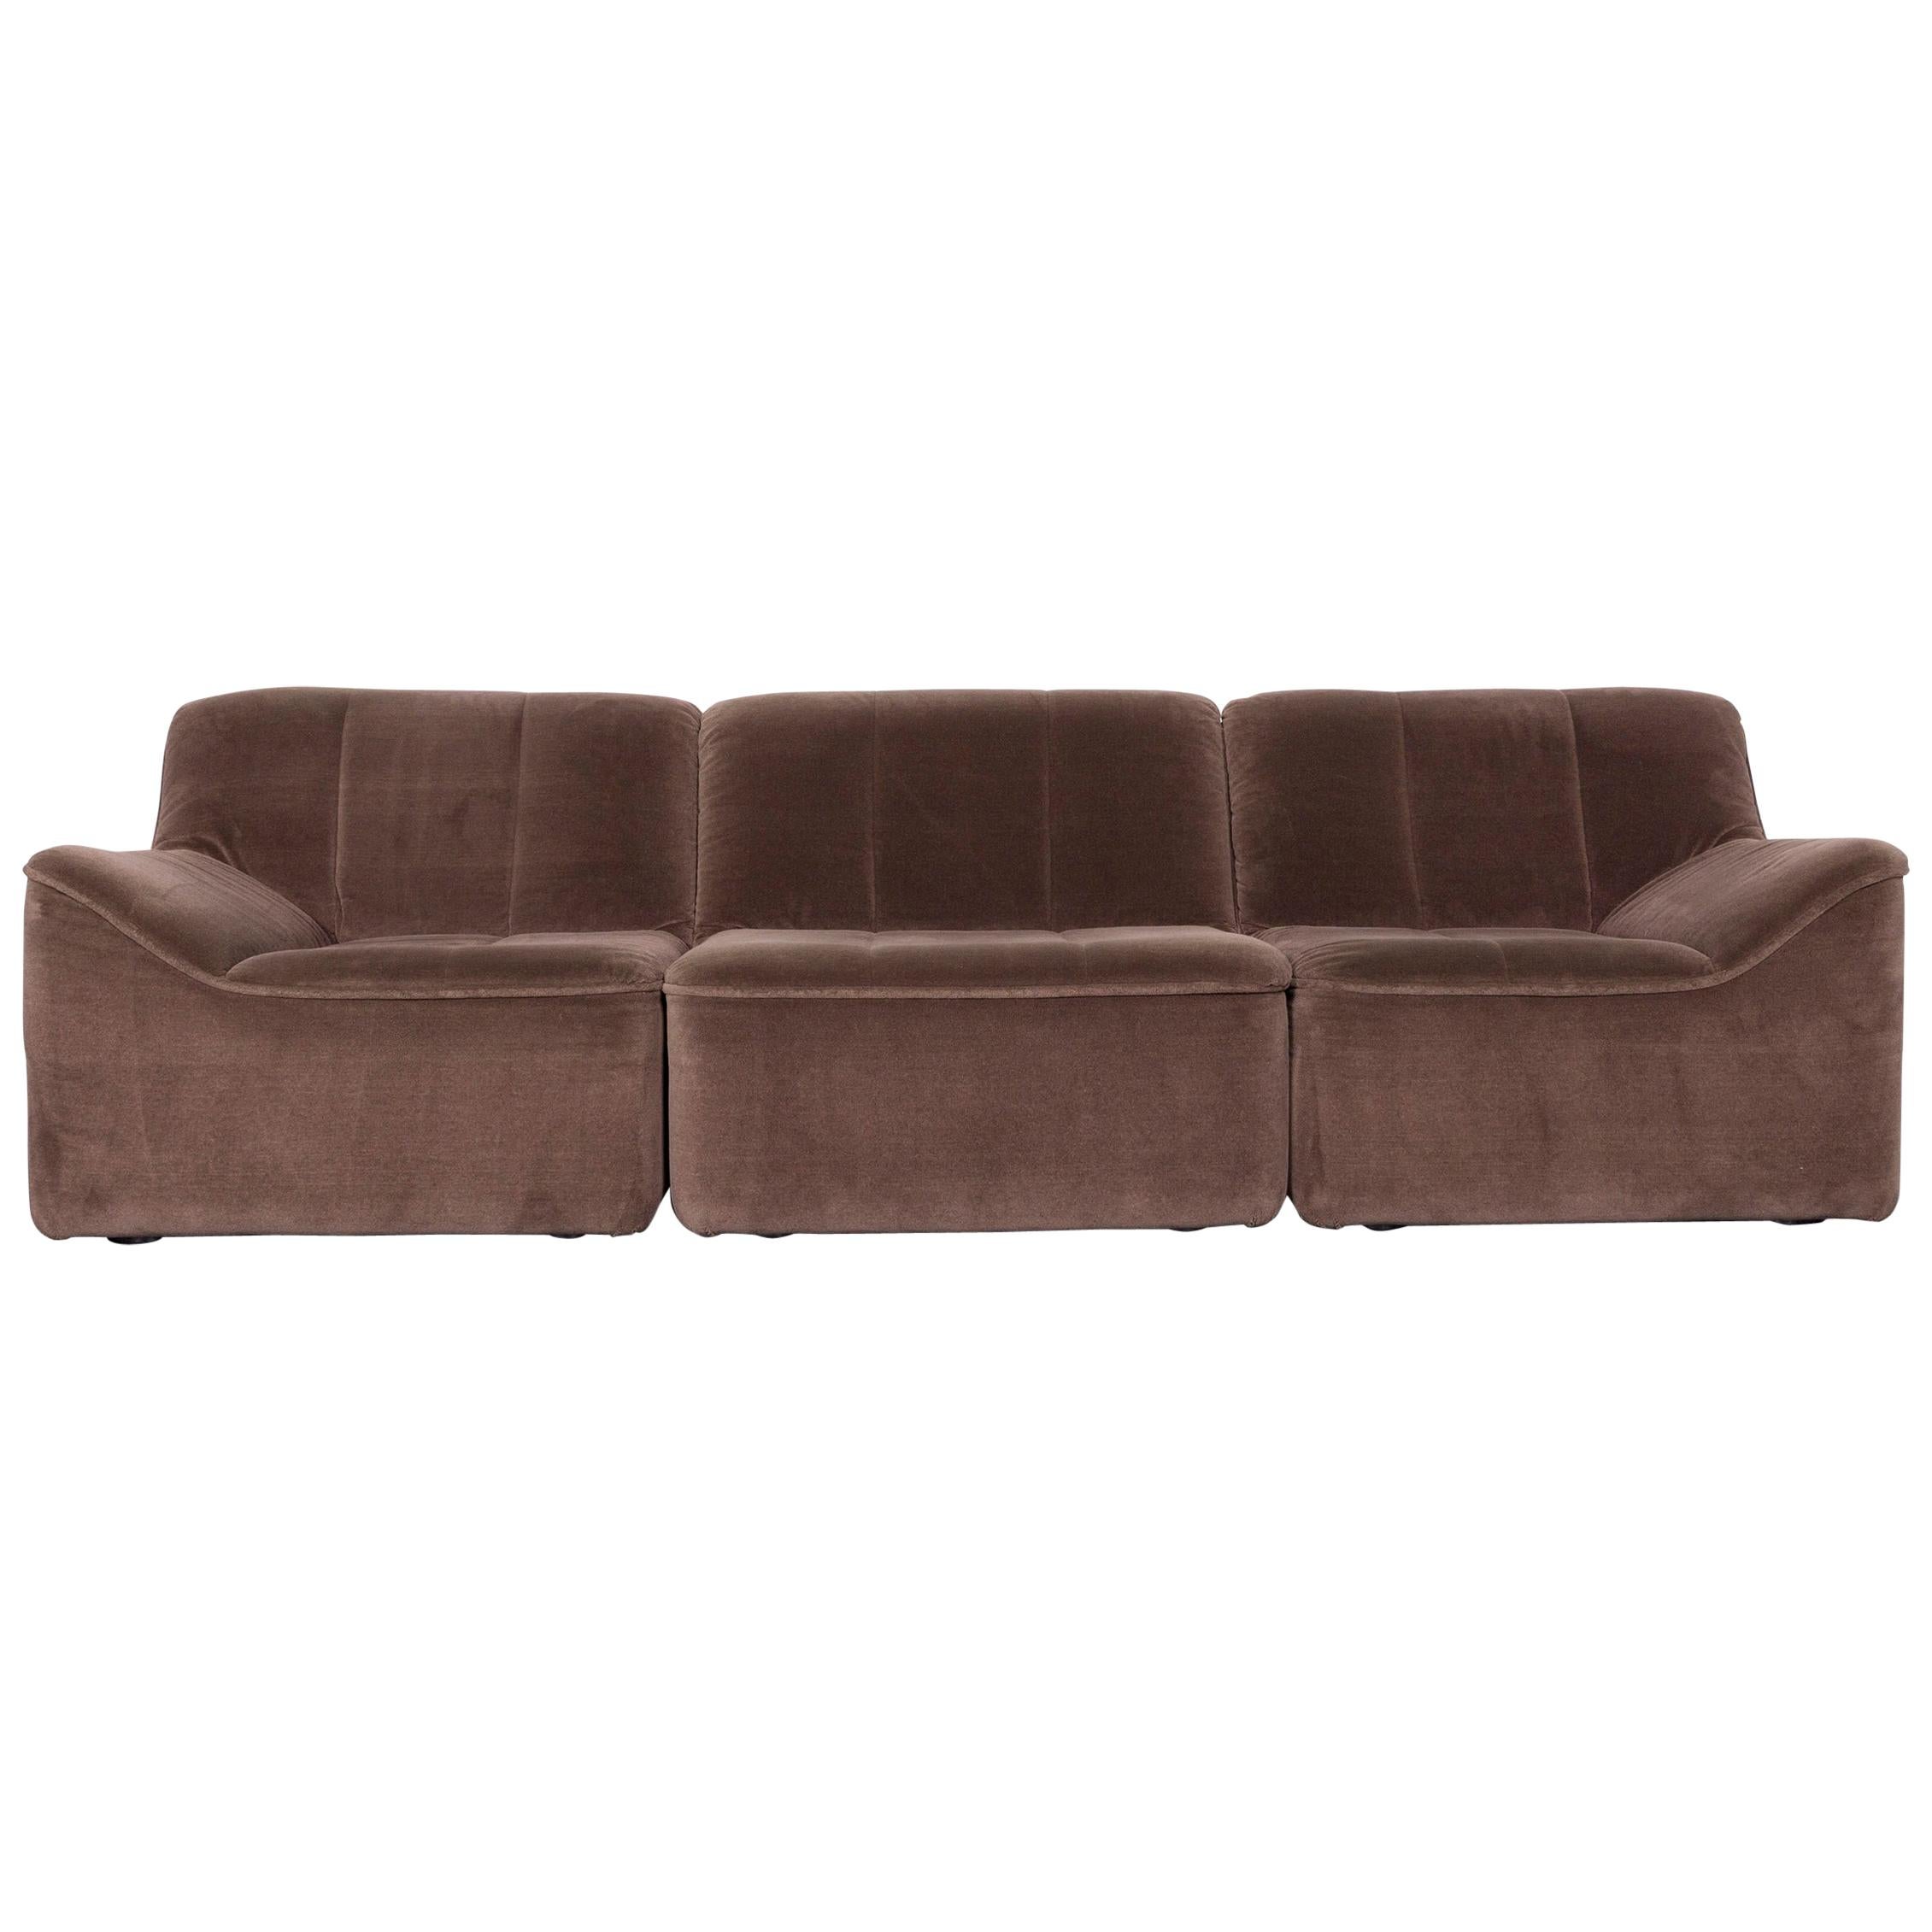 COR Designer Fabric Sofa Brown Three-Seat Couch For Sale